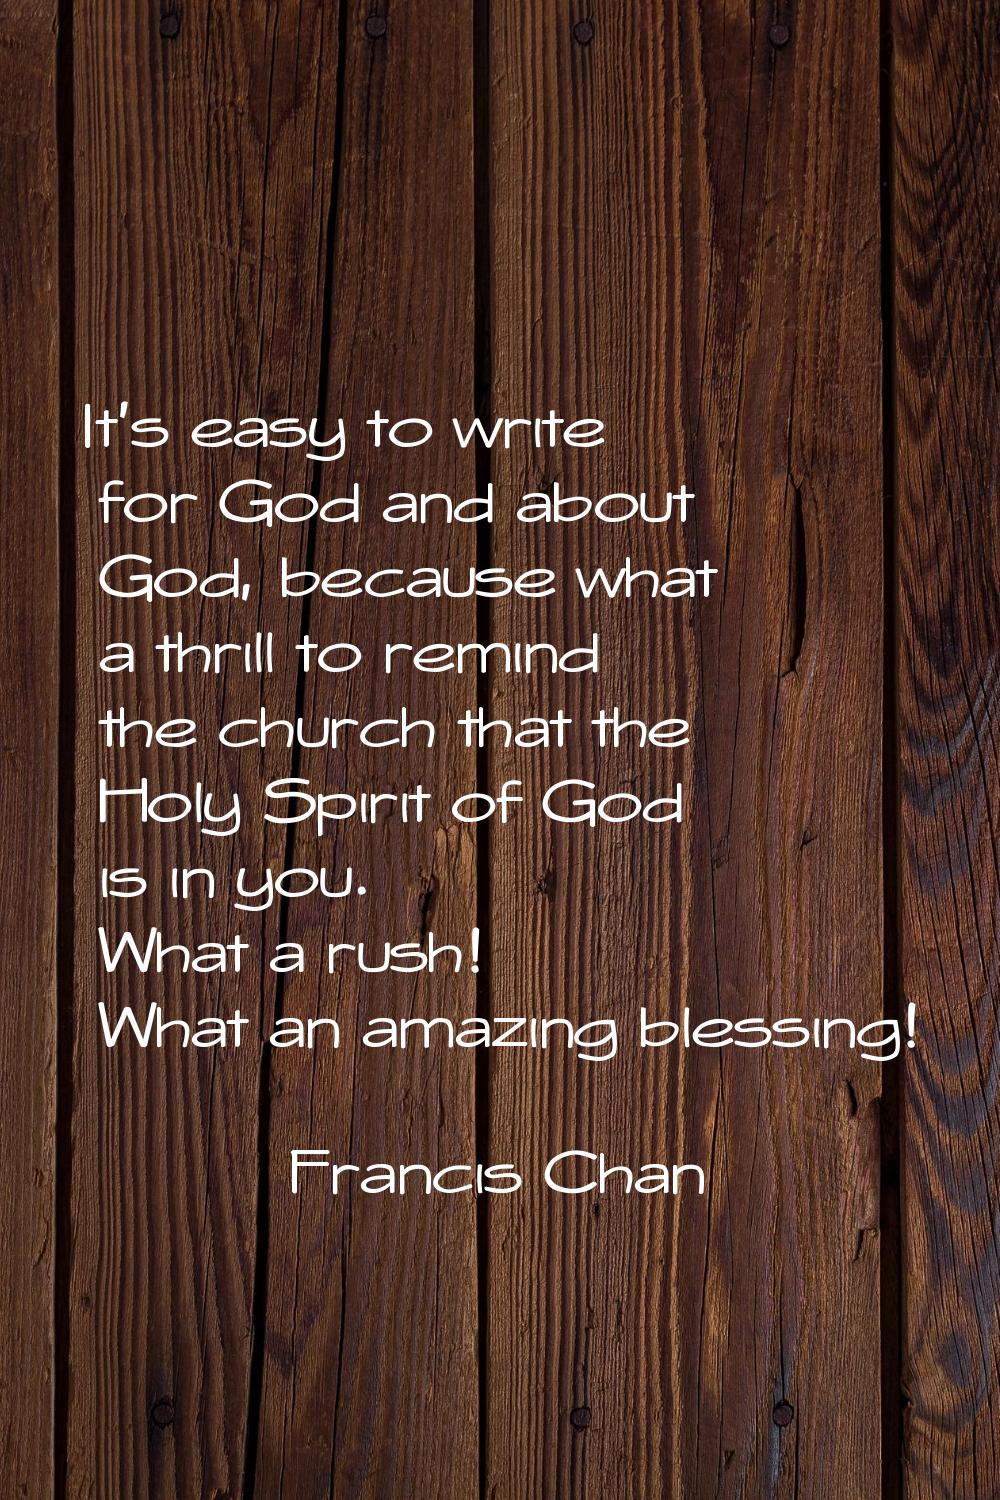 It's easy to write for God and about God, because what a thrill to remind the church that the Holy 